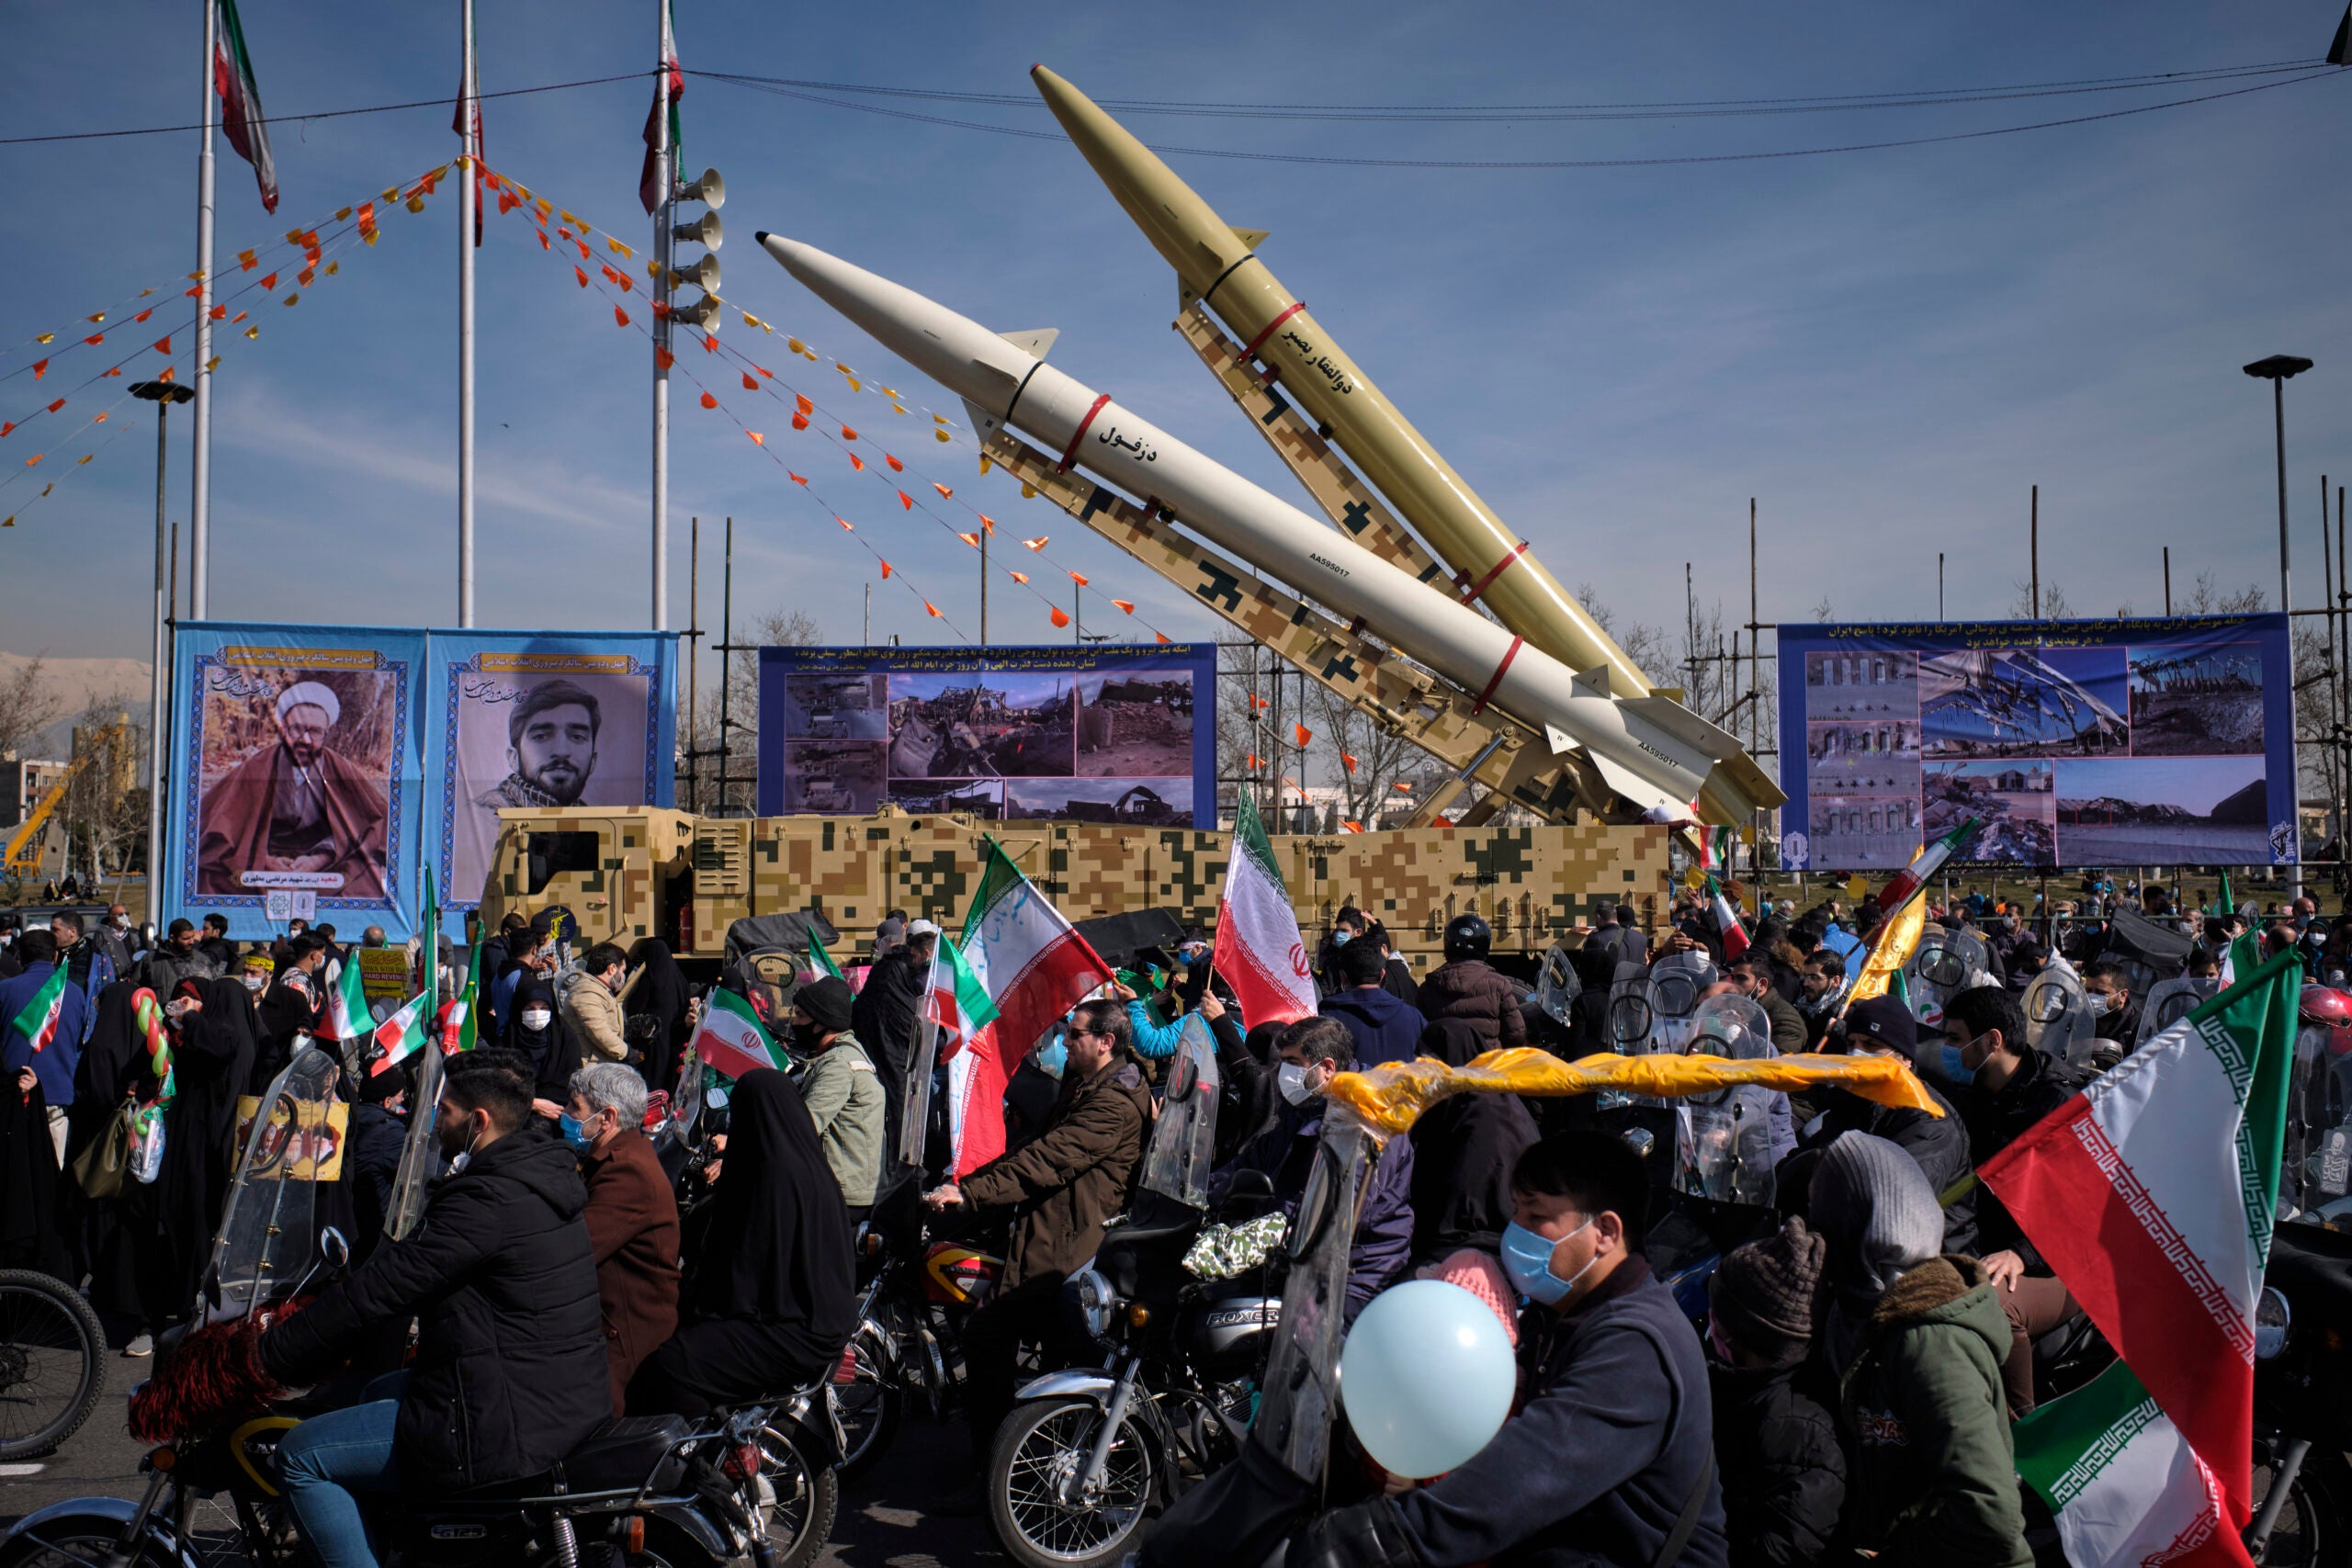 Iran-made, Dezful medium range ballistic missile (Bottom) and Zolfaghar road-mobile single-stage solid-propelled liquid fueled missile are pictured in the Azadi (Freedom) square during a rally to commemorate the 42nd Victory anniversary of the Islamic Revolution, that held with motorcycles amid the new coronavirus disease (COVID-19) outbreak in Iran, in Tehran on February 10, 2021, on February 10, 2021.  (Photo by Morteza Nikoubazl/NurPhoto via Getty Images)